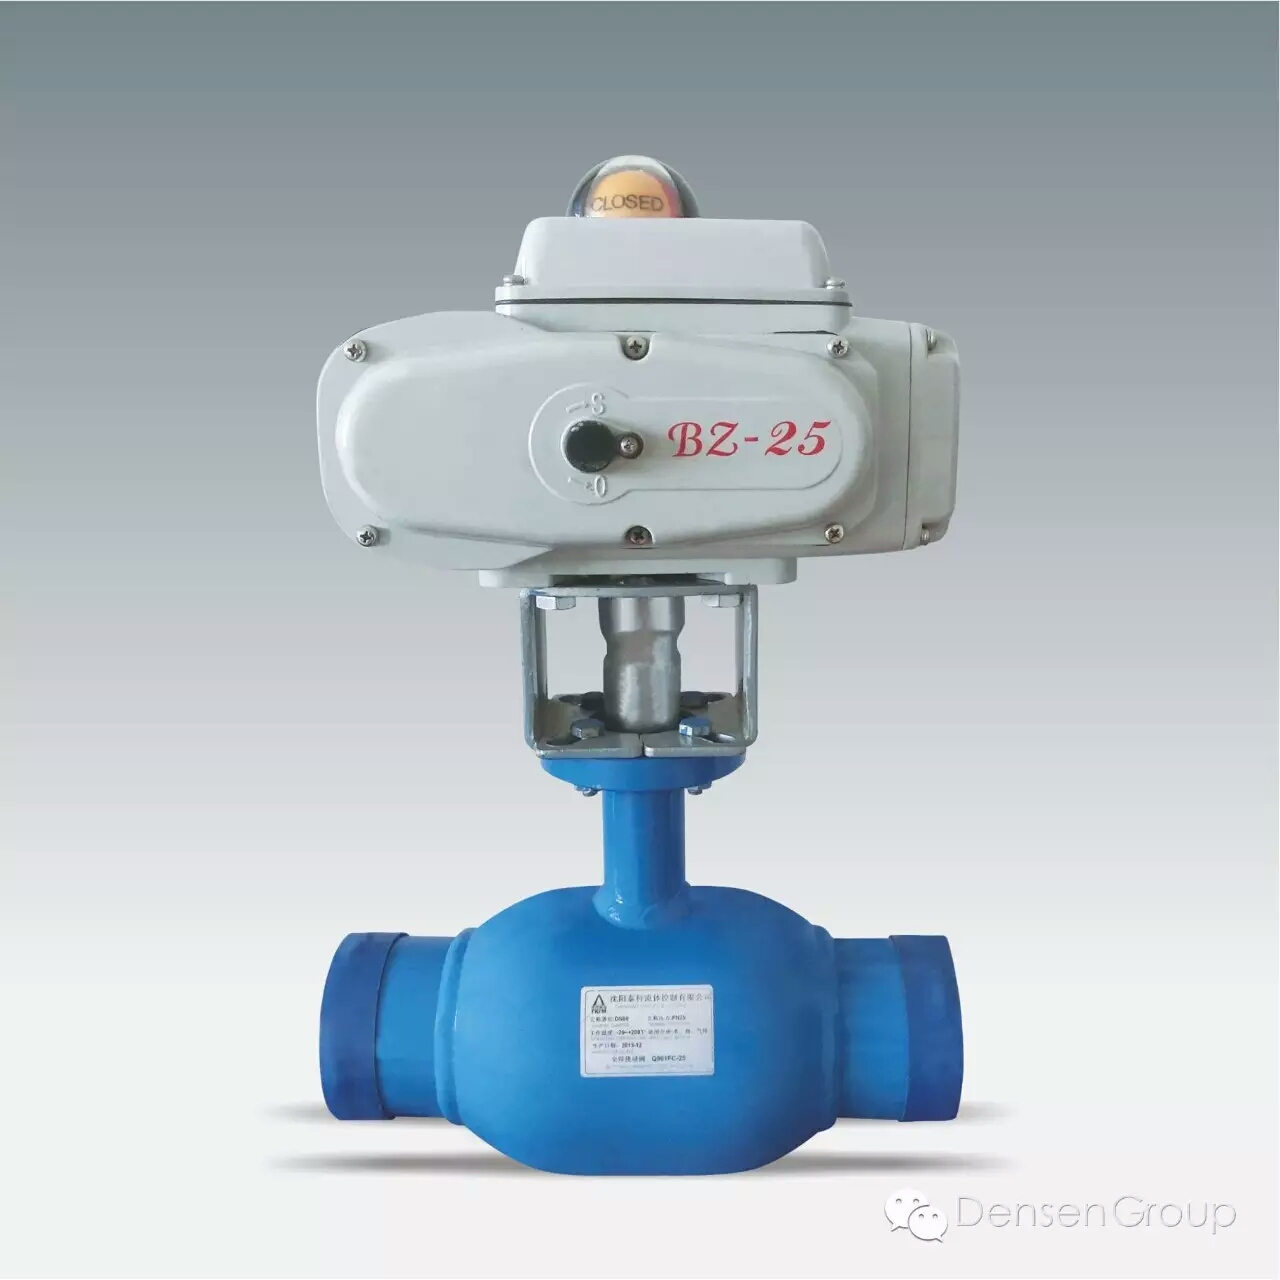 About welded ball valve